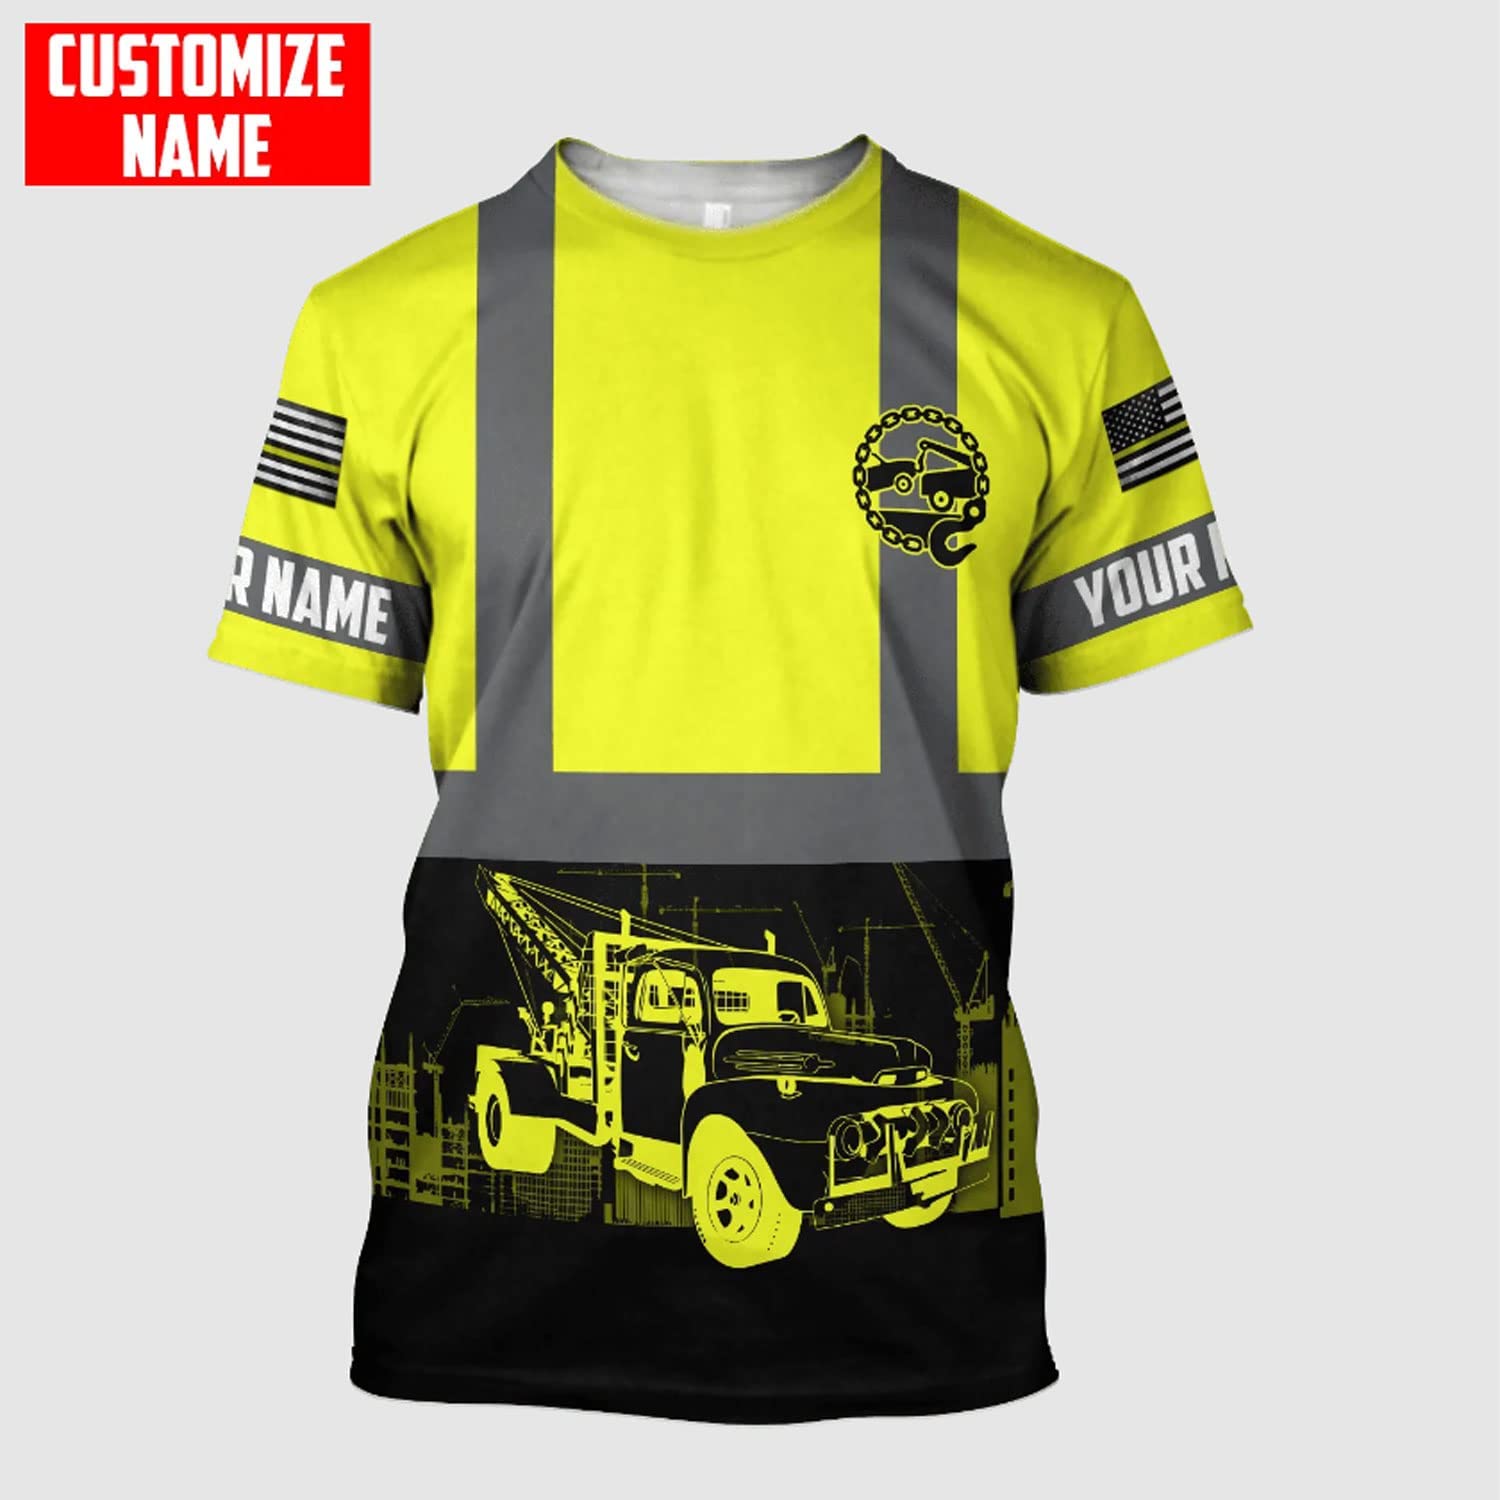 customized 3d printed tow truck shirt a unique gift for tow truck enthusiasts baseball players and more! available in hawaiian sweatshirt hoodie and zip hoodie styles with over printing. jot gfjyt